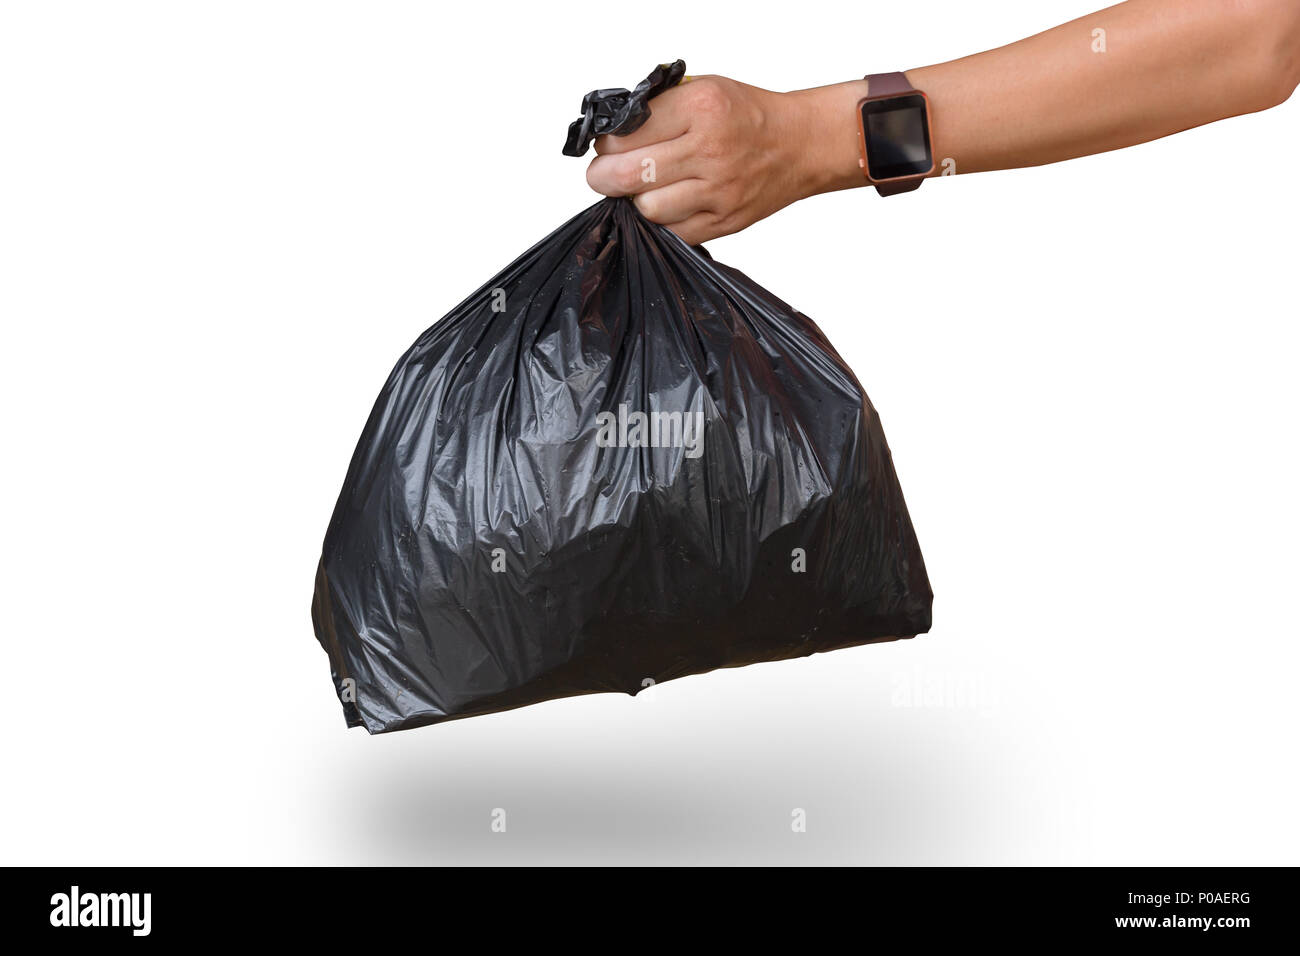 https://c8.alamy.com/comp/P0AERG/man-hand-holding-garbage-bag-isolated-on-white-with-clipping-path-P0AERG.jpg